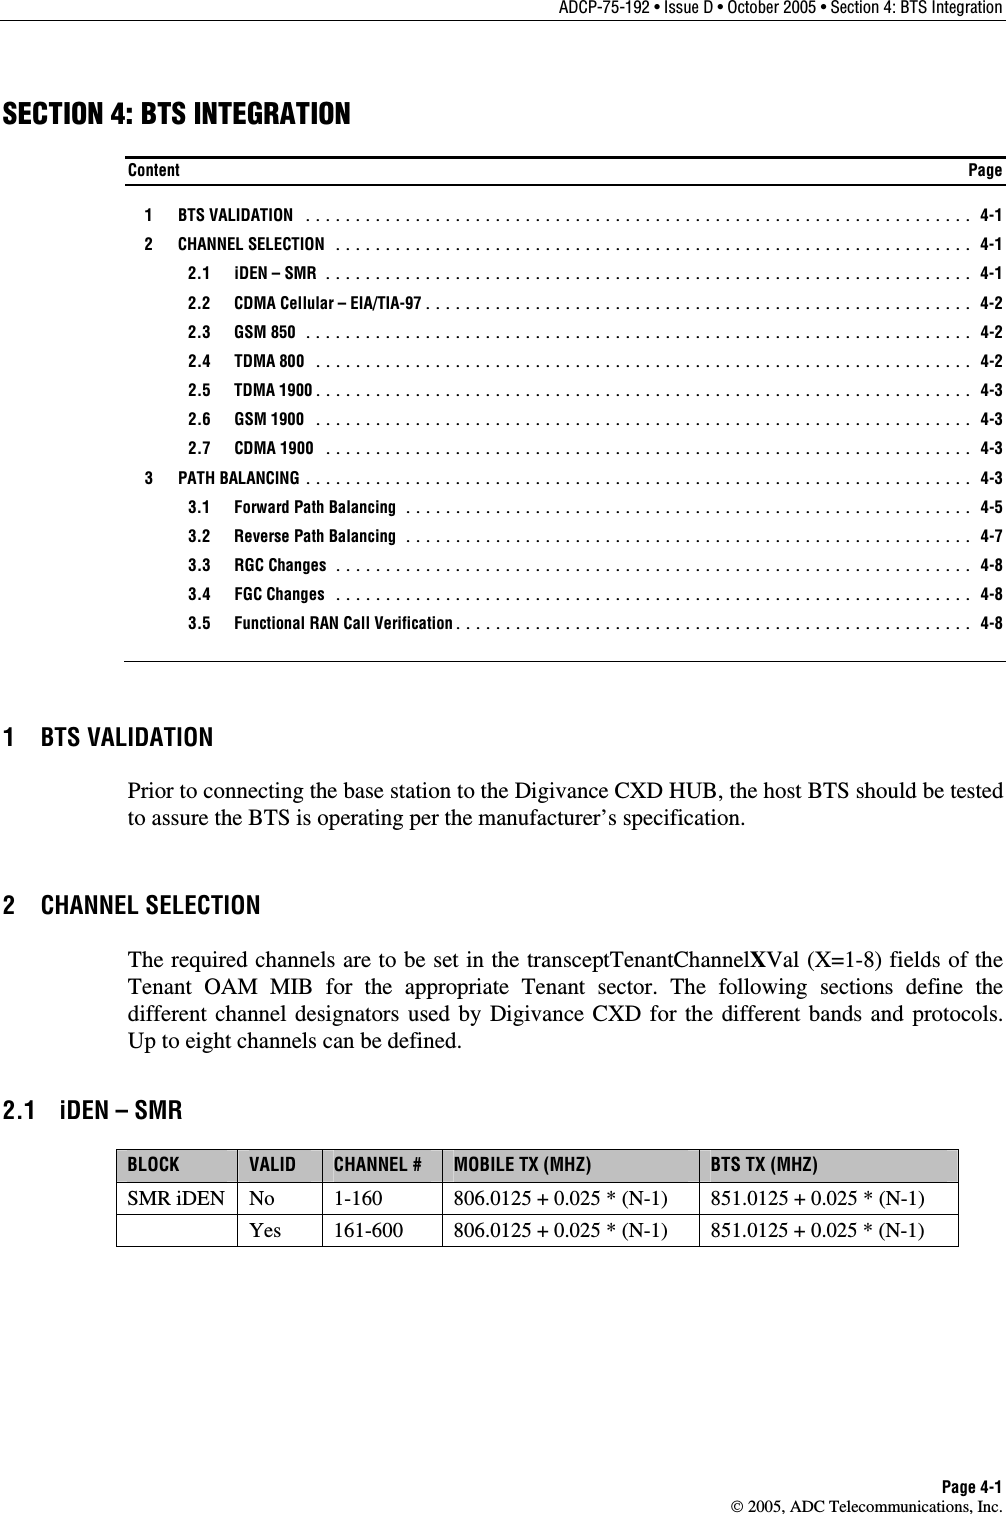 ADCP-75-192 • Issue D • October 2005 • Section 4: BTS Integration Page 4-1  2005, ADC Telecommunications, Inc. SECTION 4: BTS INTEGRATION Content  Page  1  BTS VALIDATION ................................................................... 4-1  2  CHANNEL SELECTION ................................................................ 4-1  2.1 iDEN – SMR ................................................................. 4-1   2.2  CDMA Cellular – EIA/TIA-97....................................................... 4-2  2.3 GSM 850 ................................................................... 4-2  2.4 TDMA 800 .................................................................. 4-2  2.5 TDMA 1900.................................................................. 4-3  2.6 GSM 1900 .................................................................. 4-3  2.7 CDMA 1900 ................................................................. 4-3  3  PATH BALANCING ................................................................... 4-3   3.1  Forward Path Balancing ......................................................... 4-5   3.2  Reverse Path Balancing ......................................................... 4-7  3.3 RGC Changes ................................................................ 4-8  3.4 FGC Changes ................................................................ 4-8   3.5  Functional RAN Call Verification.................................................... 4-8 1 BTS VALIDATION Prior to connecting the base station to the Digivance CXD HUB, the host BTS should be tested to assure the BTS is operating per the manufacturer’s specification. 2 CHANNEL SELECTION The required channels are to be set in the transceptTenantChannelXVal (X=1-8) fields of the Tenant OAM MIB for the appropriate Tenant sector. The following sections define the different channel designators used by Digivance CXD for the different bands and protocols. Up to eight channels can be defined. 2.1  iDEN – SMR BLOCK  VALID  CHANNEL #  MOBILE TX (MHZ)  BTS TX (MHZ) SMR iDEN  No  1-160  806.0125 + 0.025 * (N-1)  851.0125 + 0.025 * (N-1)   Yes  161-600  806.0125 + 0.025 * (N-1)  851.0125 + 0.025 * (N-1)  